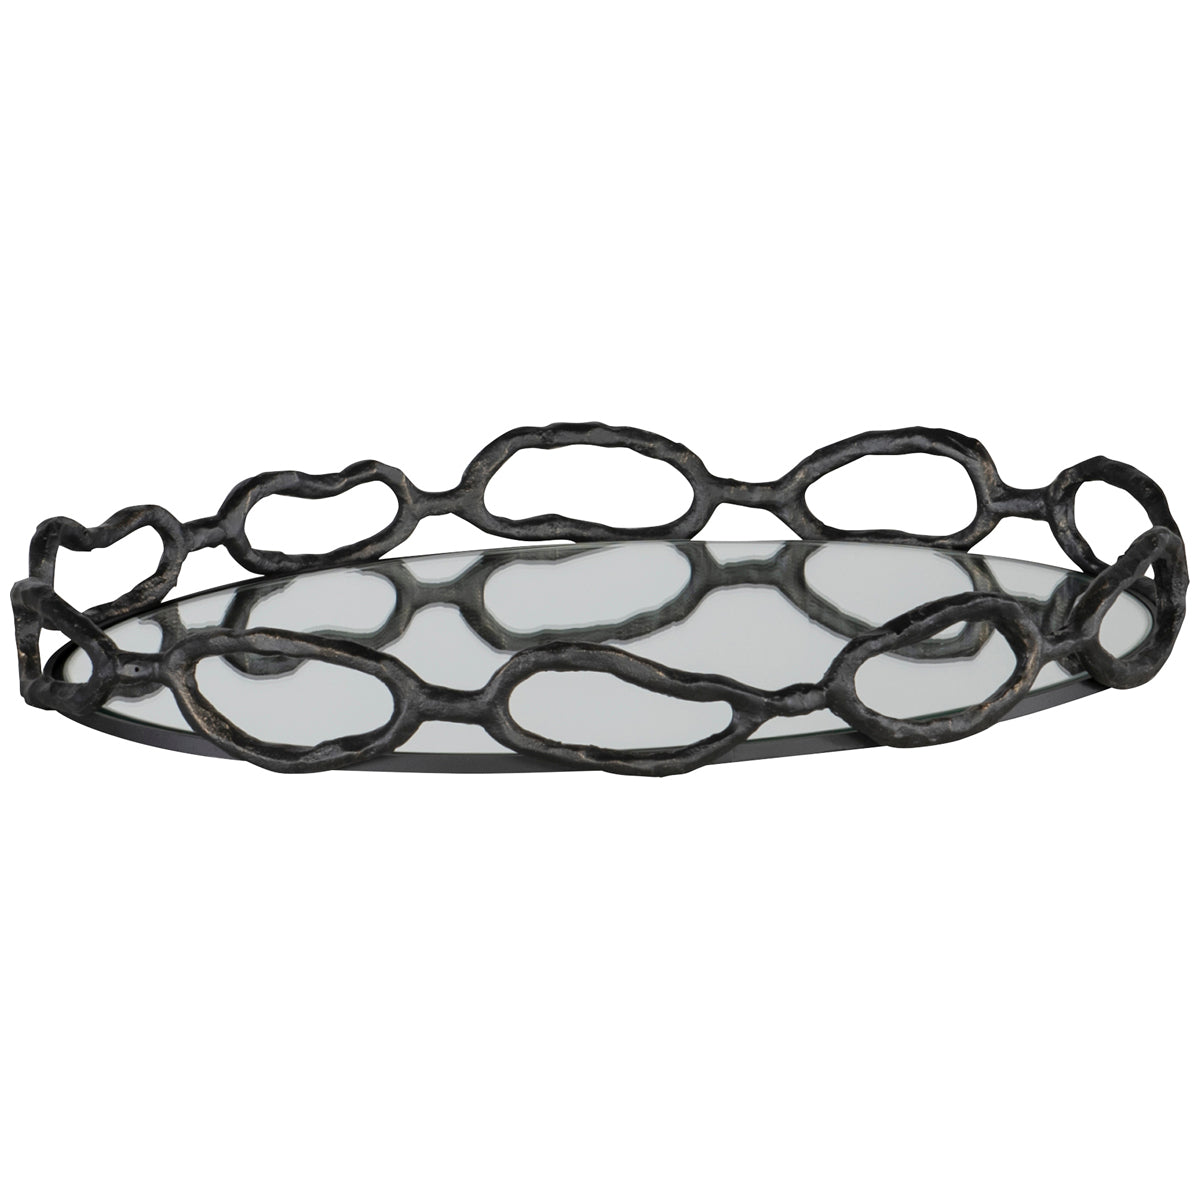 Uttermost Cable Black Chain Tray